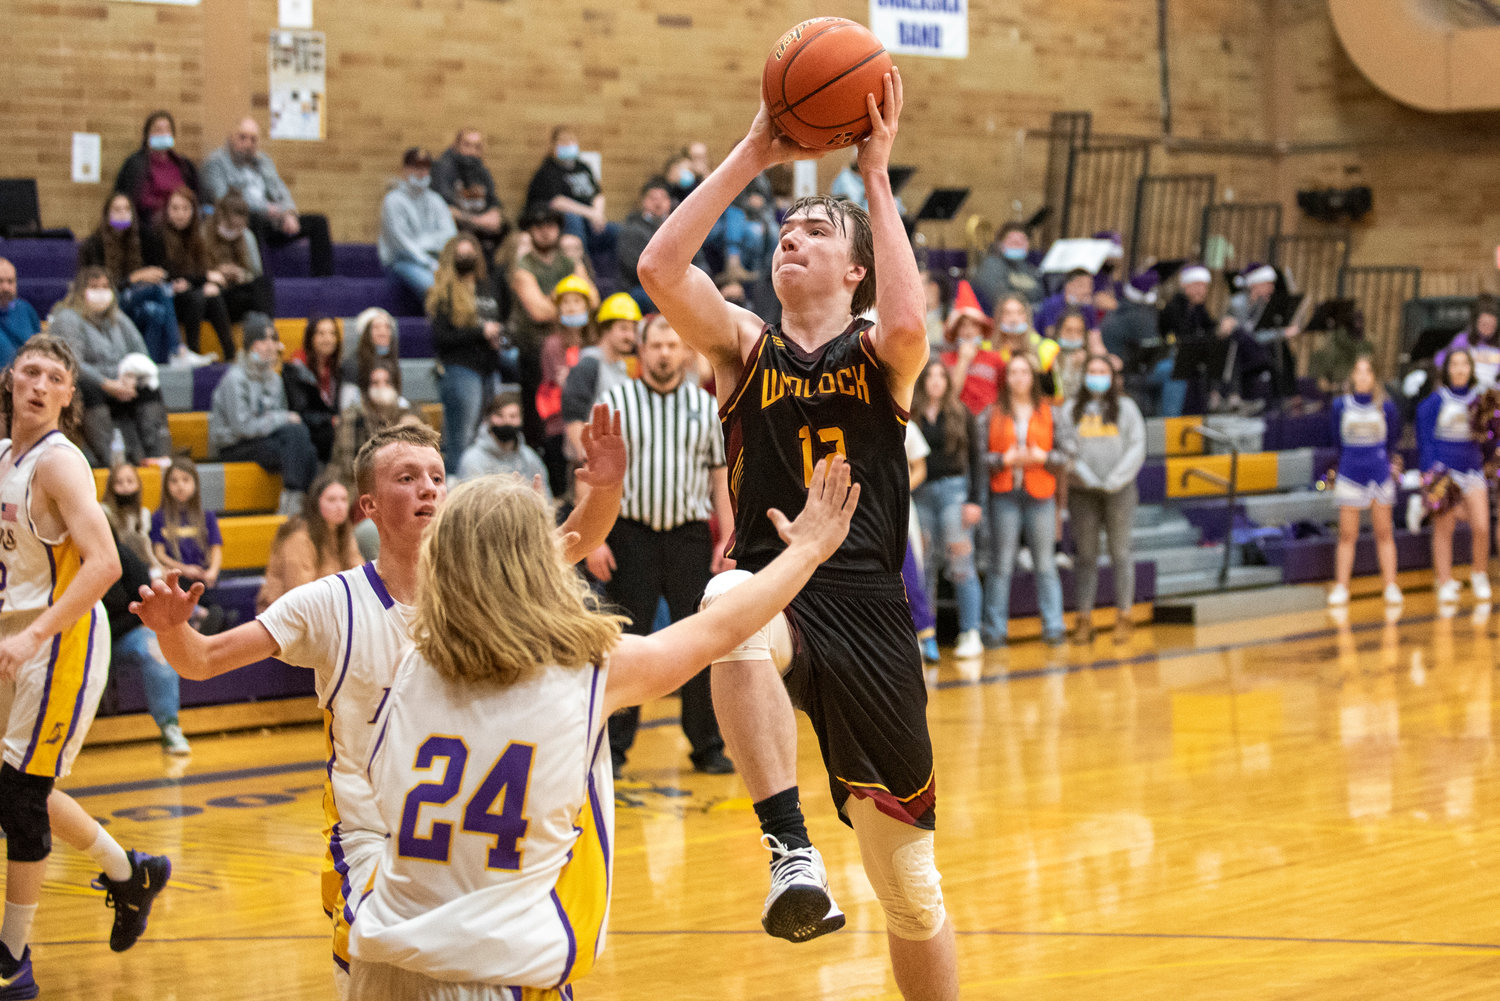 Winlock's Chase Schofield (12) drives for a layup against Onalaska on Dec. 9.